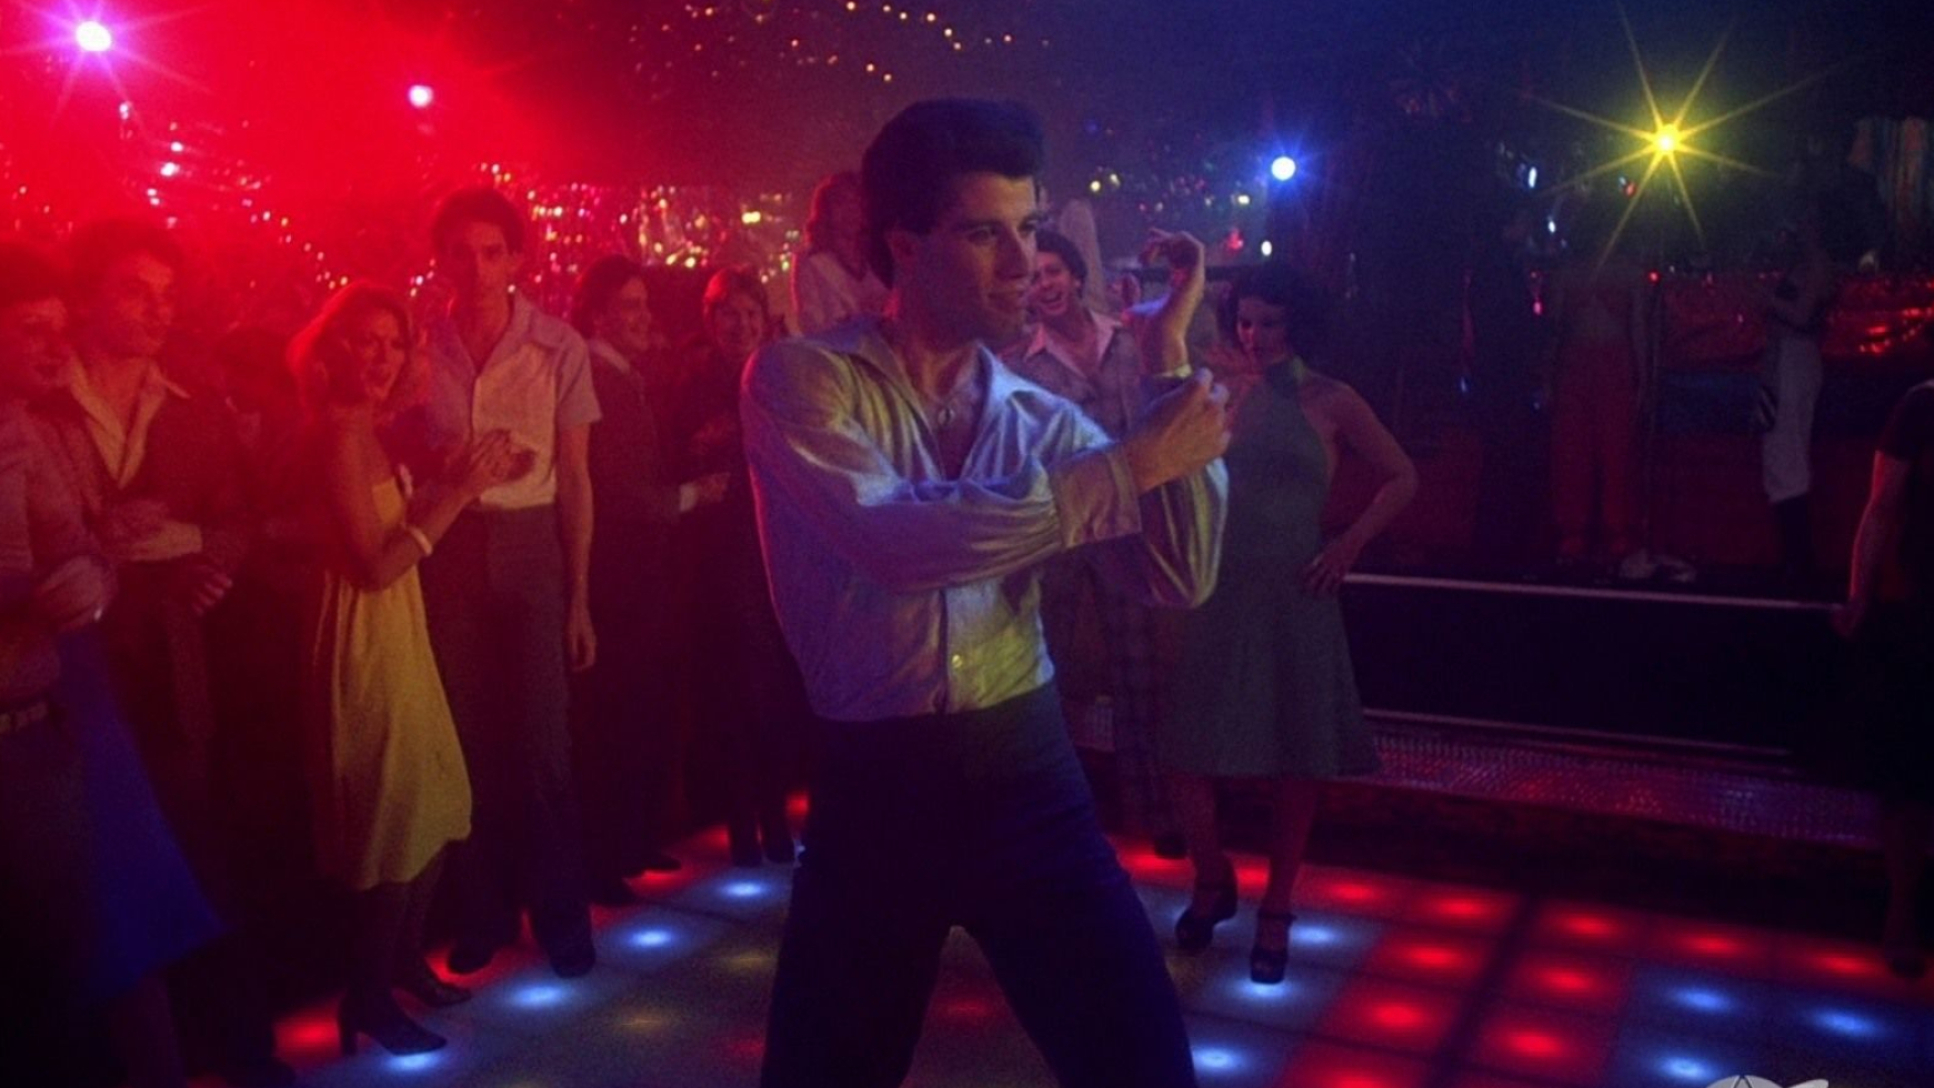 1934x1088 Free download Saturday Night Fever Wallpapers [] for your Desktop, Mobile \u0026 Tablet | Explore 66+ Saturday Night Fever Wallpaper | Saturday Night Fever Wallpaper, Saturday Night Live Wallpapers, Saturday Morning Wallpapers